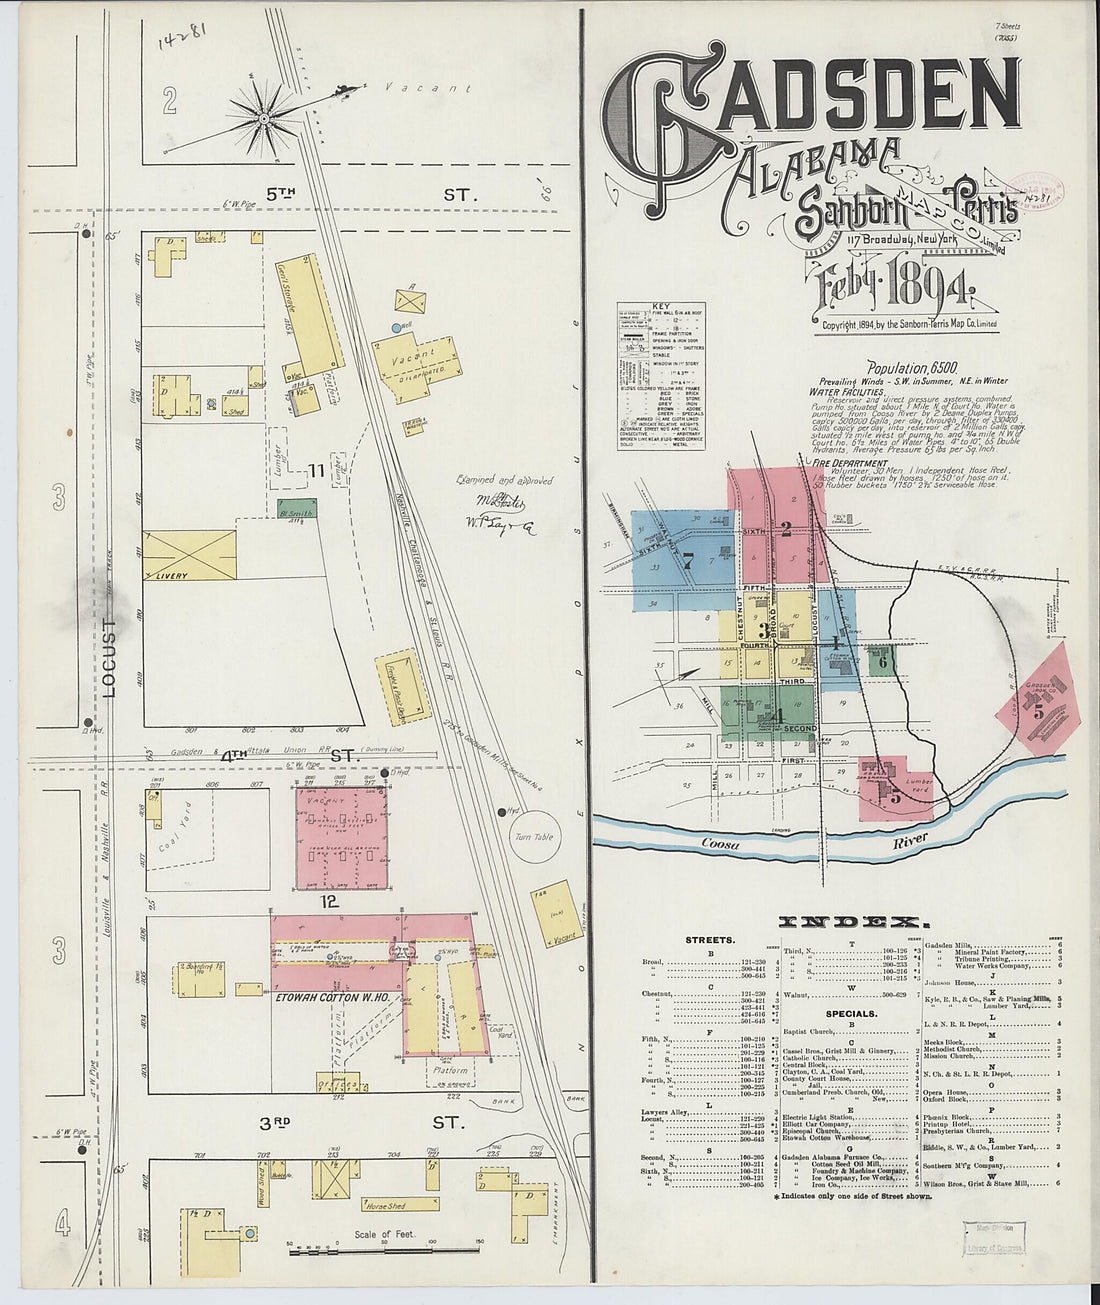 This old map of Gadsden, Etowah County, Alabama was created by Sanborn Map Company in 1894